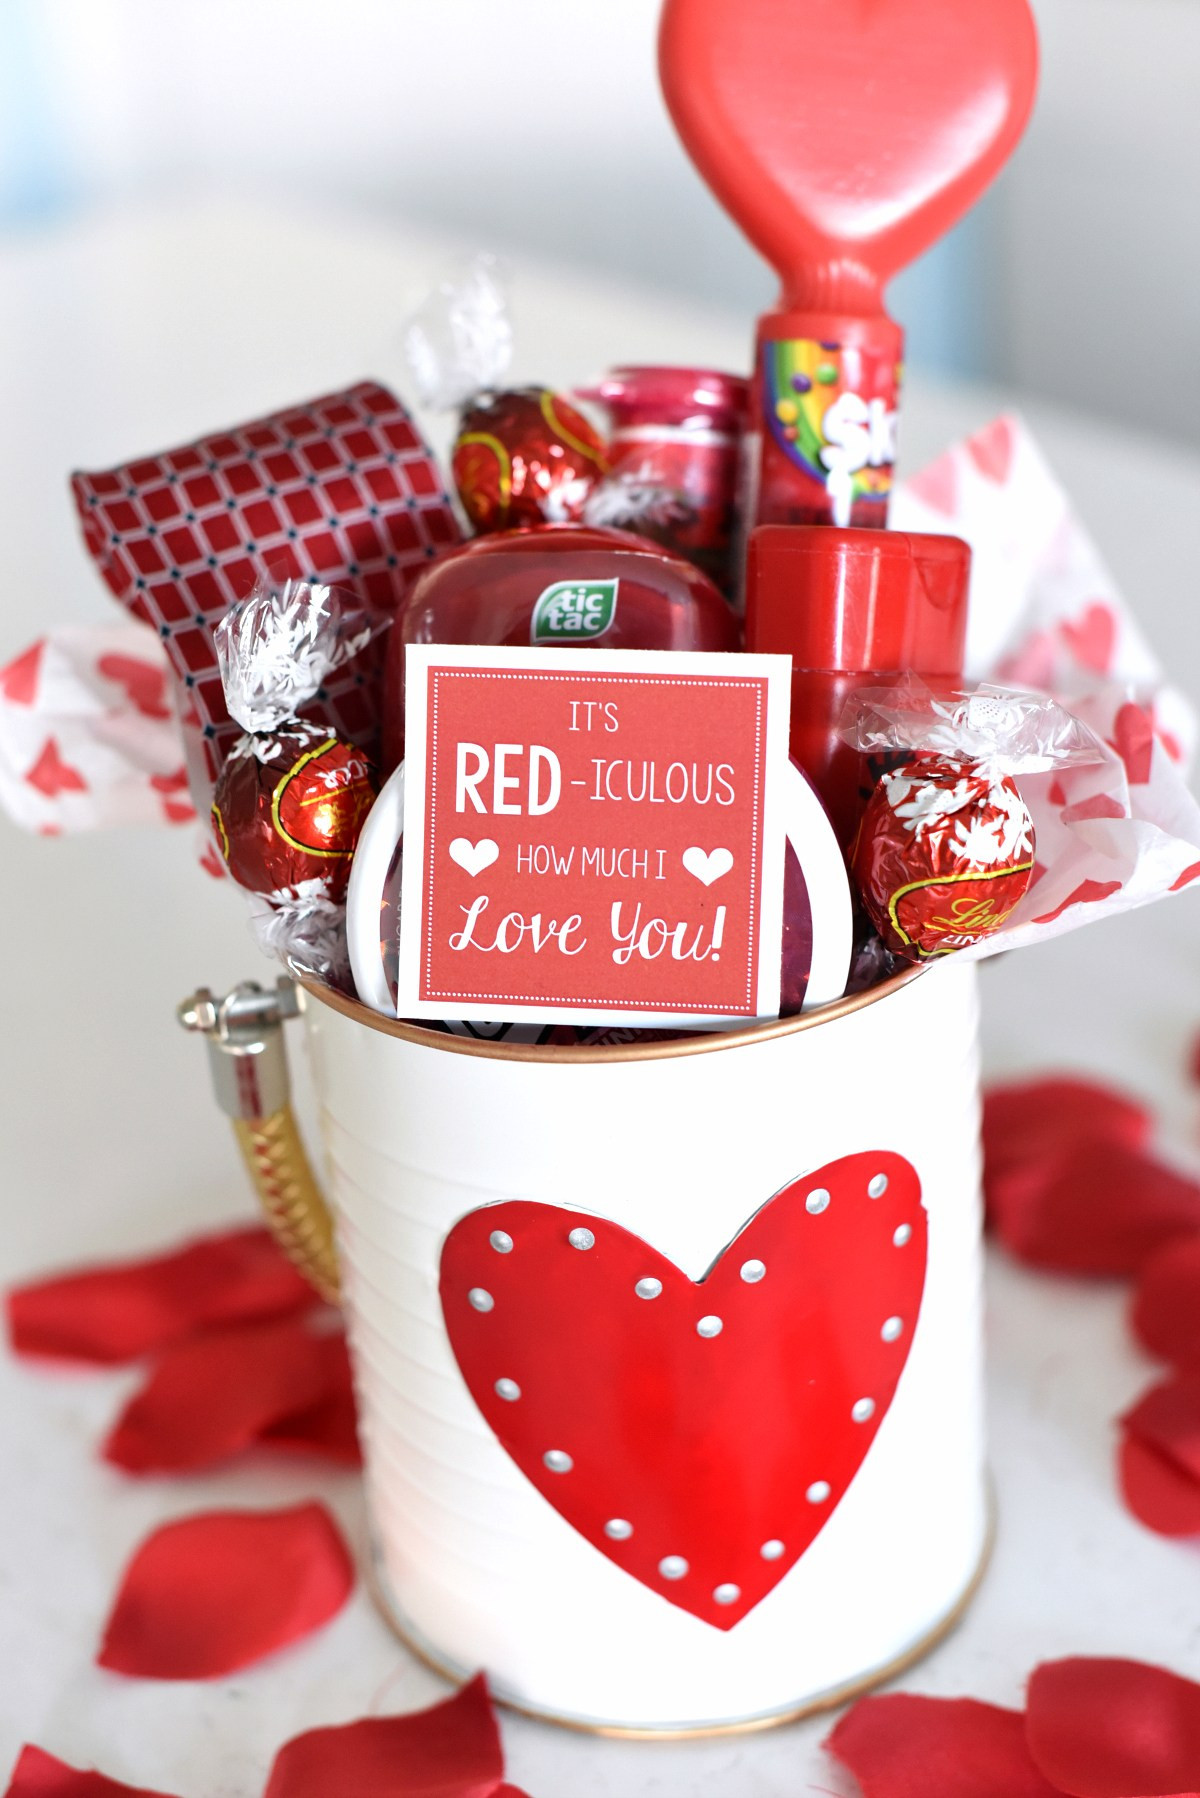 What Are Good Valentines Day Gifts
 25 DIY Valentine s Day Gift Ideas Teens Will Love